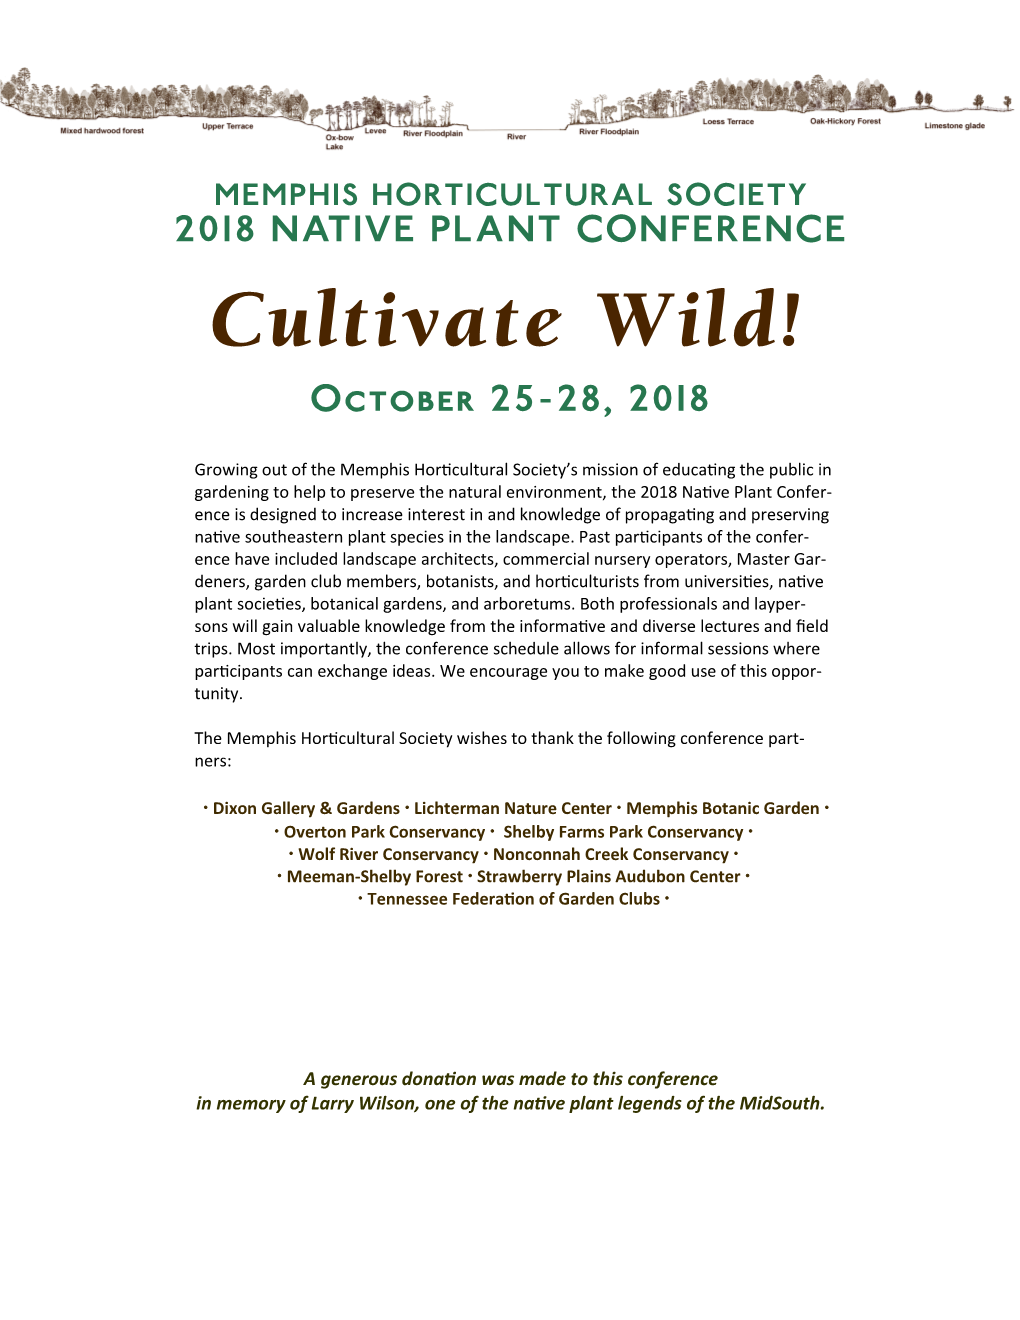 2018 NATIVE PLANT CONFERENCE Cultivate Wild!